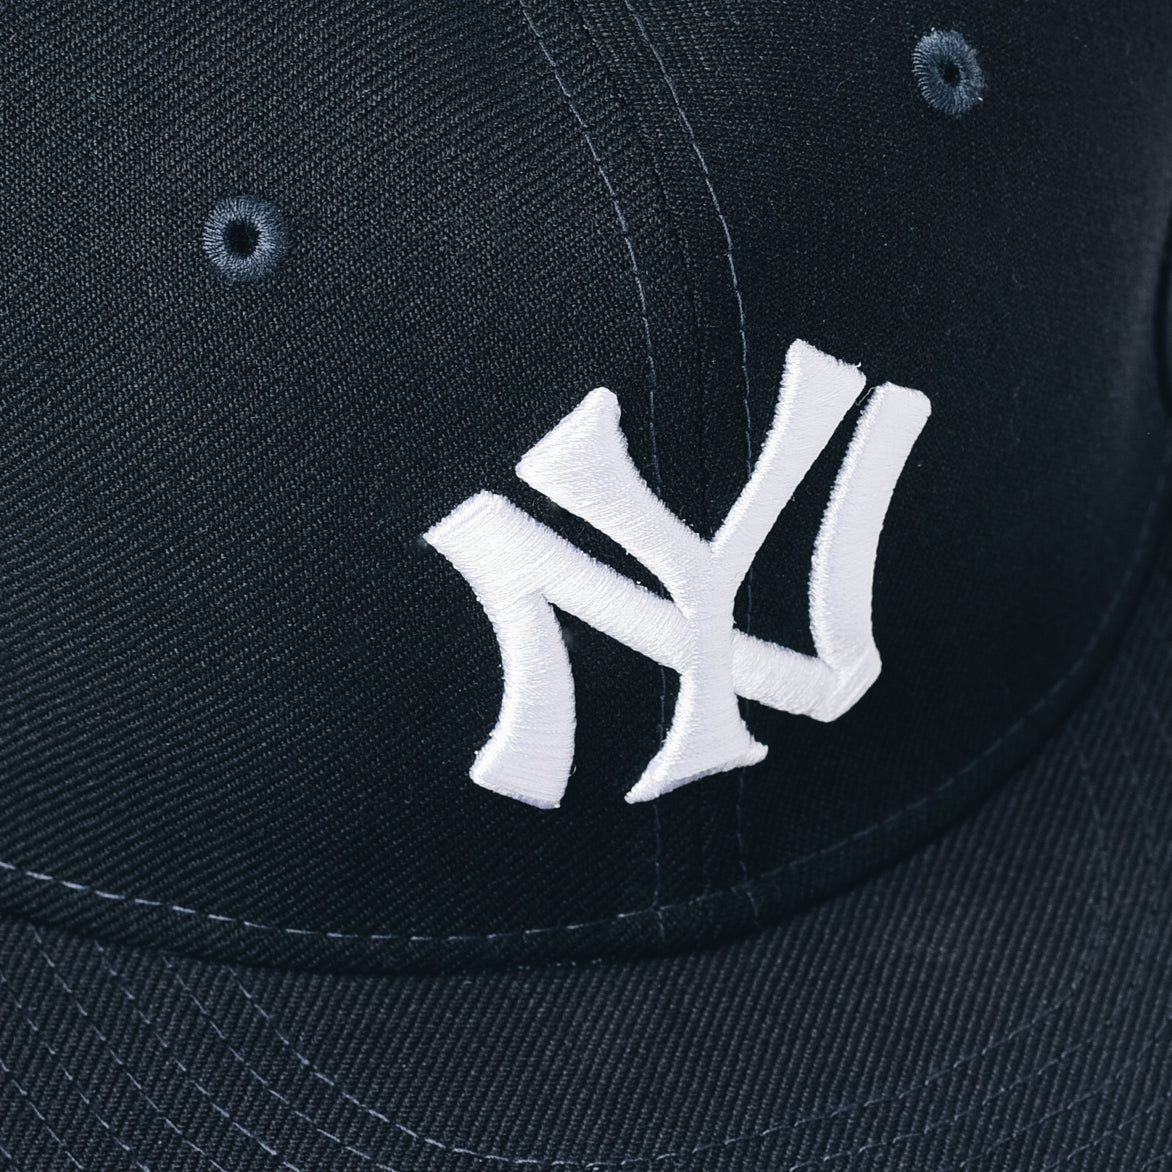 WORLD SERIES COLLECTION 5950 FITTED HAT "NEW YORK YANKEES '27"